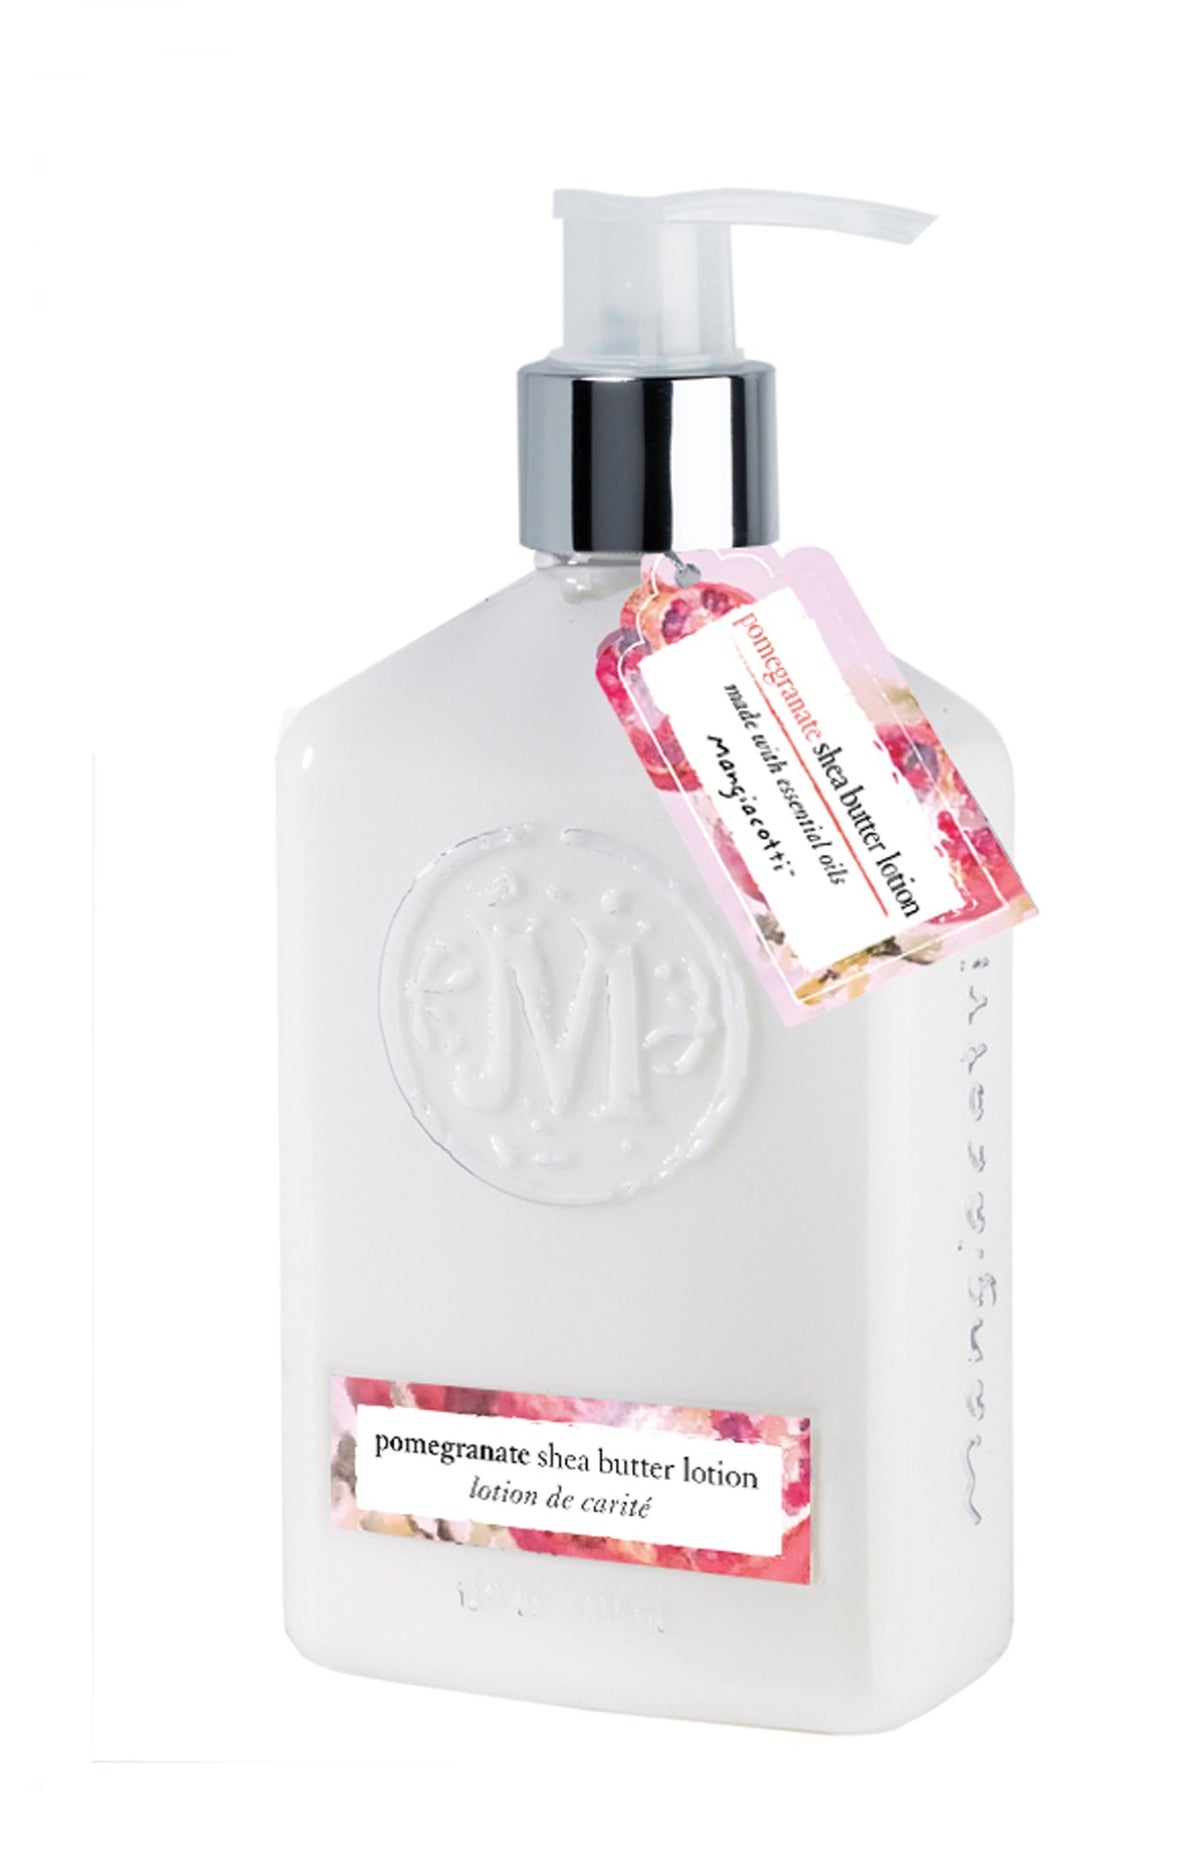 White Mangiacotti lotion bottle with a pump dispenser and an embossed logo, featuring a pink label reading "pomegranate shea butter lotion" in English and French, enriched with essential oils.